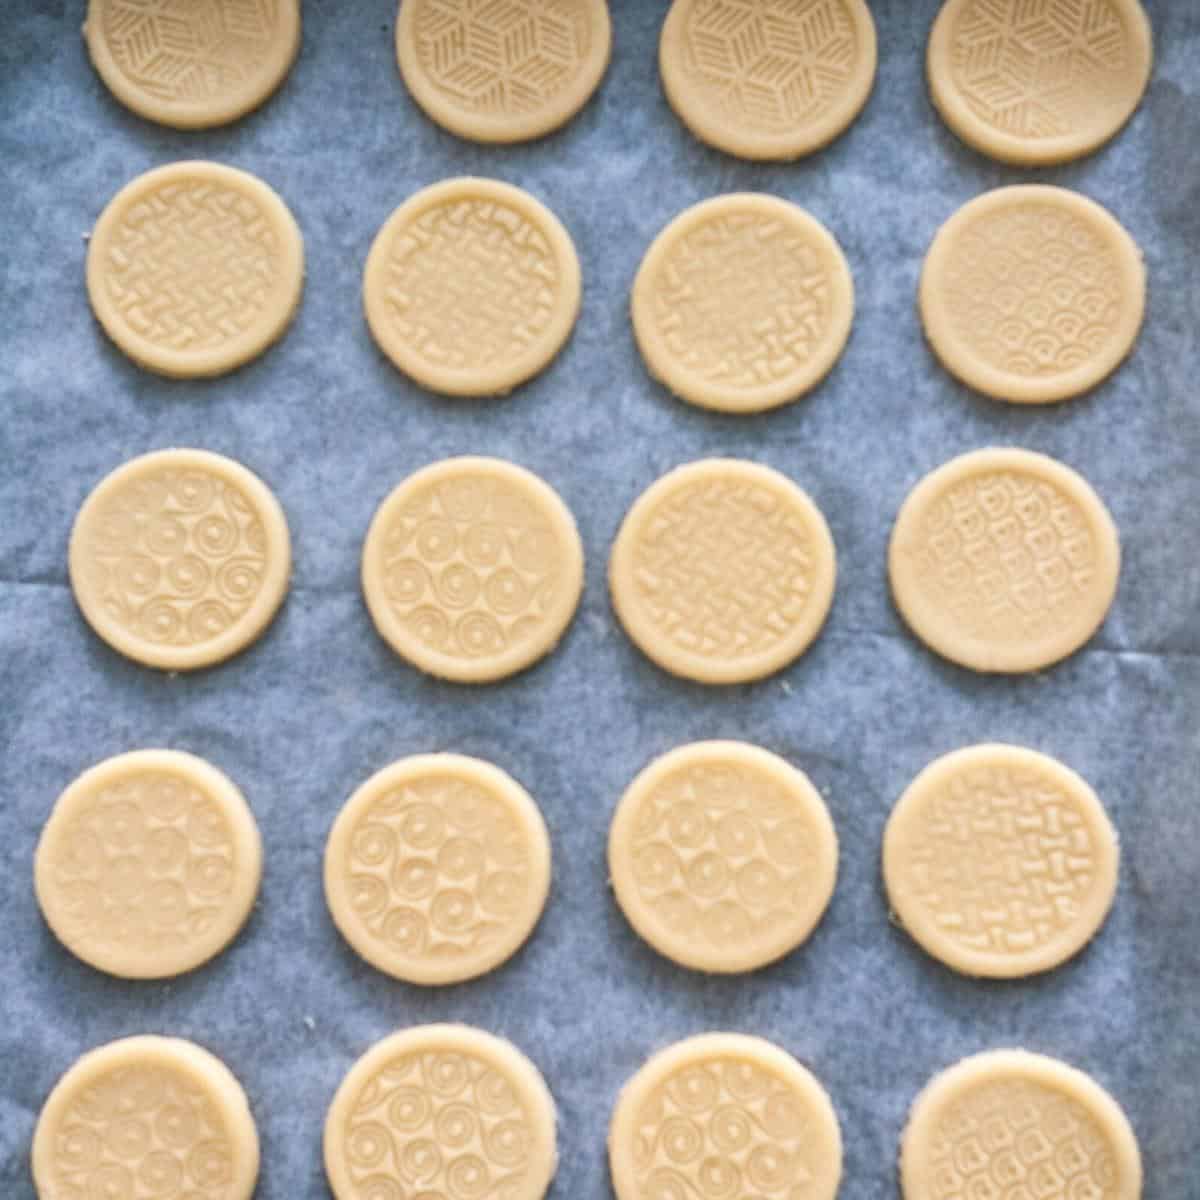 Tray with stamped cookies.